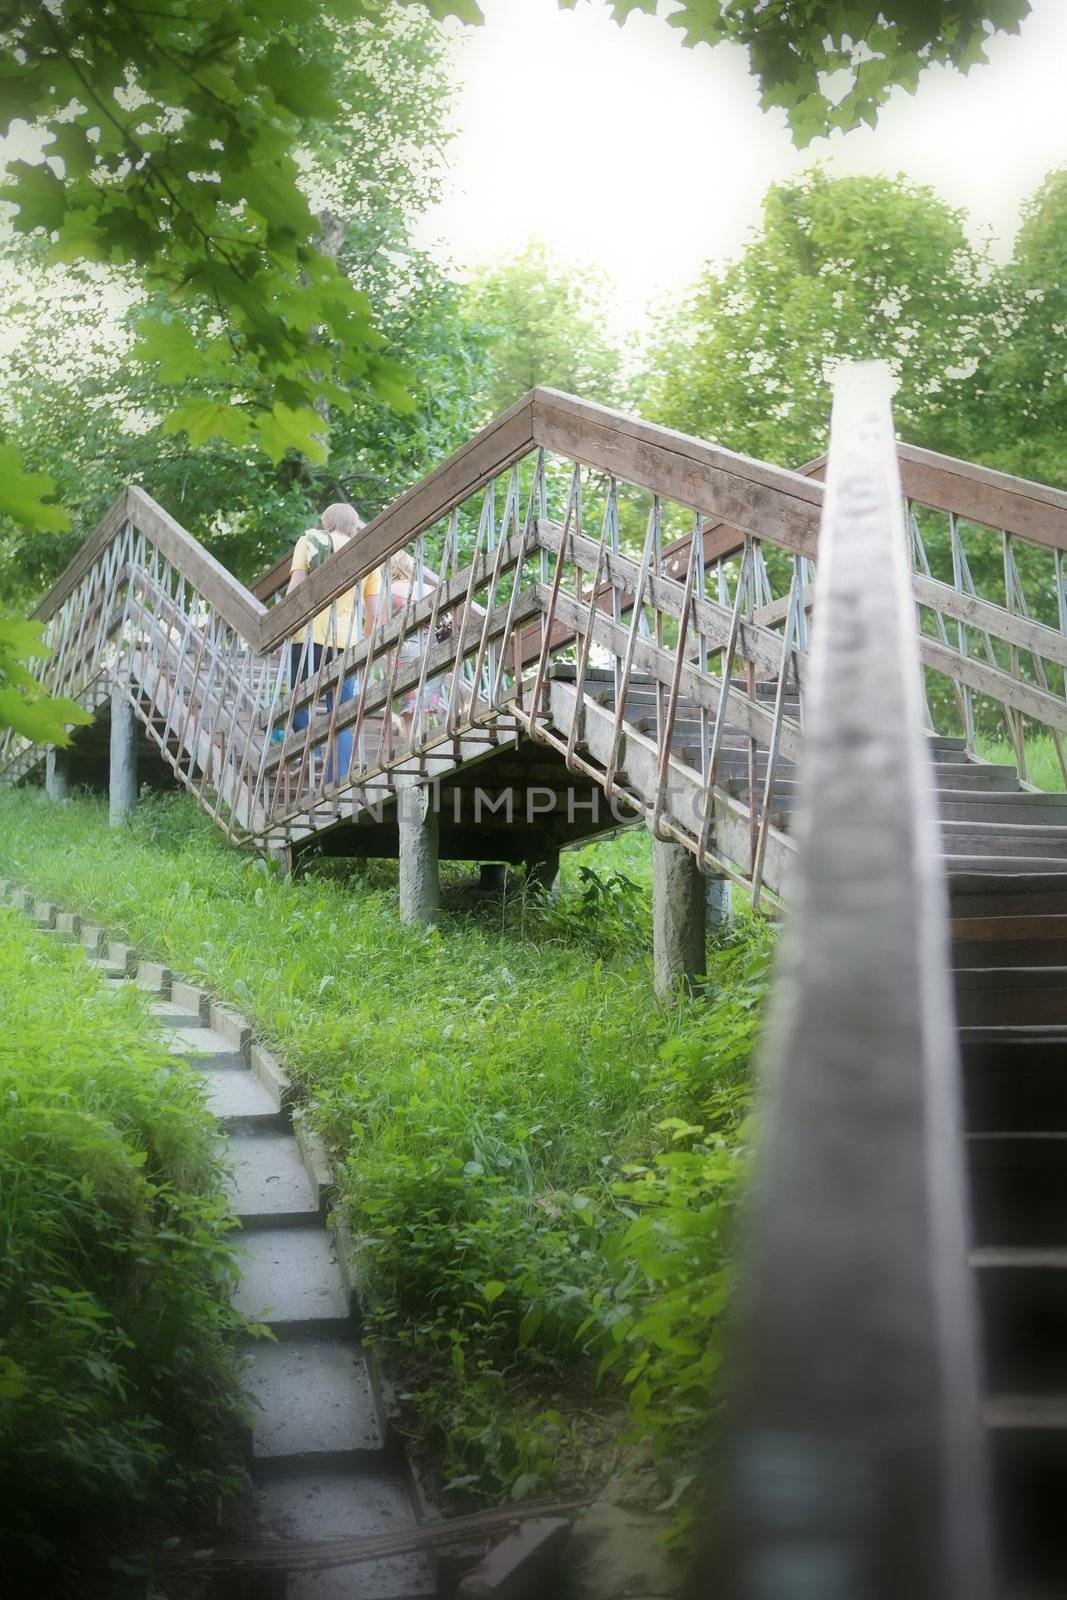 Romantic Landscape with Stairway in Park, Summer